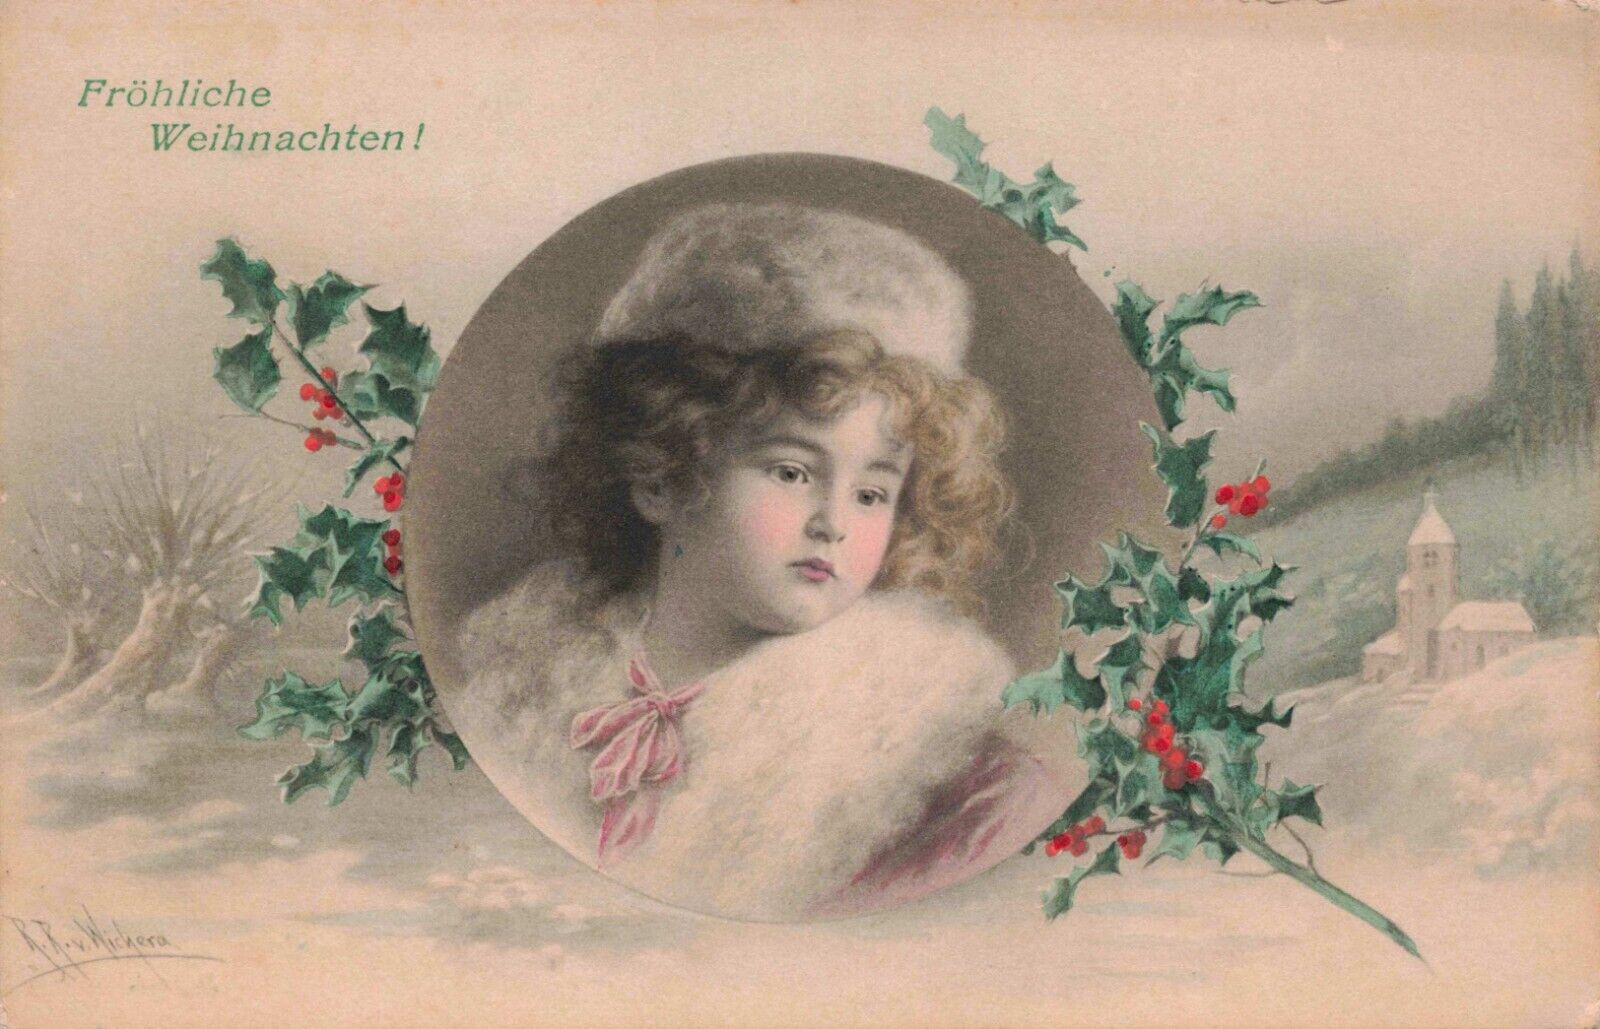 Beautiful Christmas Child Framed by Holly Artist RR Wichera Unused Postcard